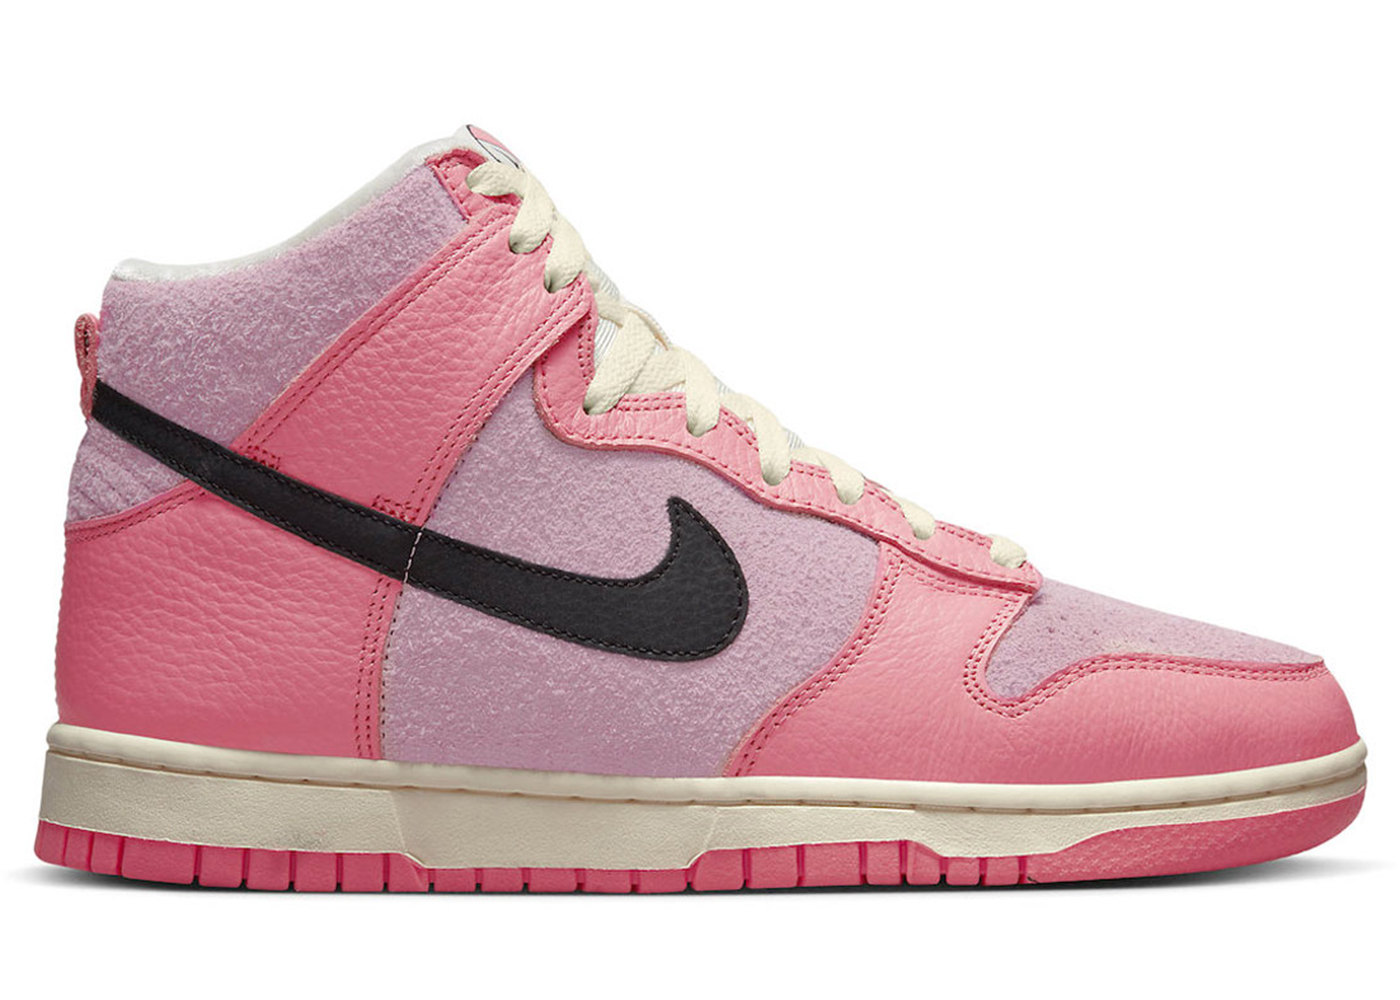 Nike Dunk High Hoops Pack Pink (Women's) - DX3359-600 - US